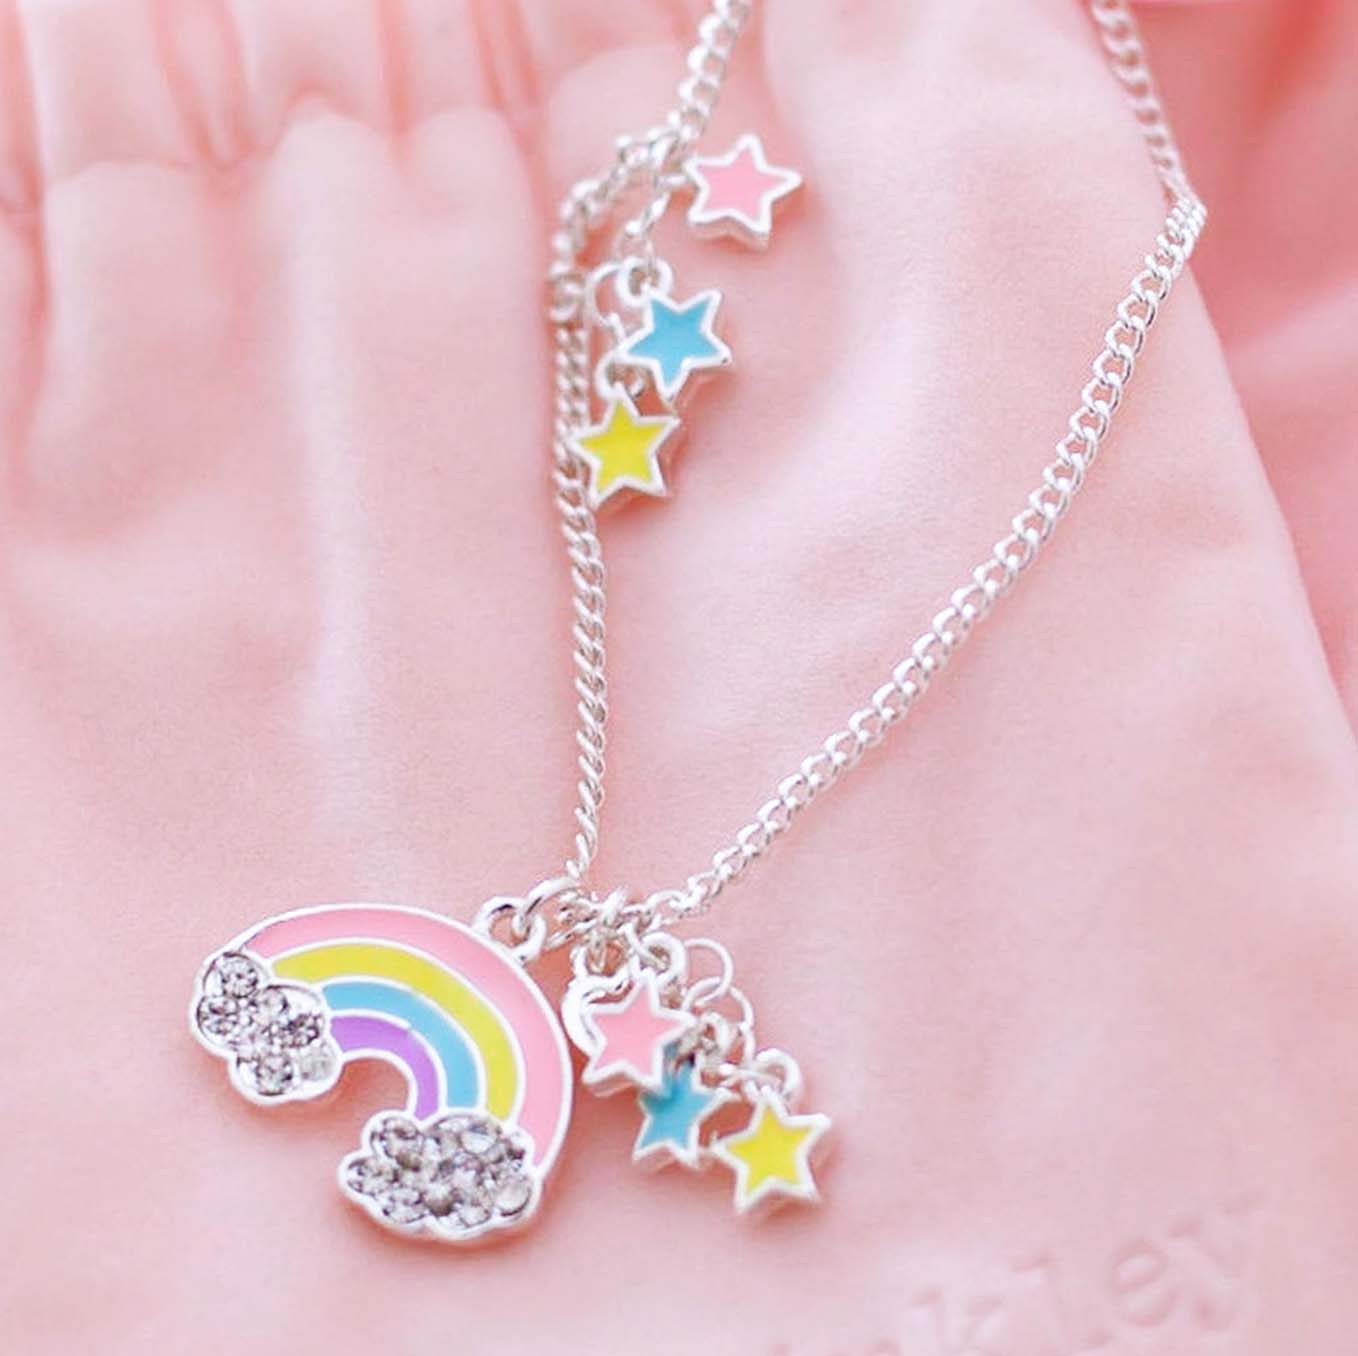 Somewhere Over the Rainbow Necklace